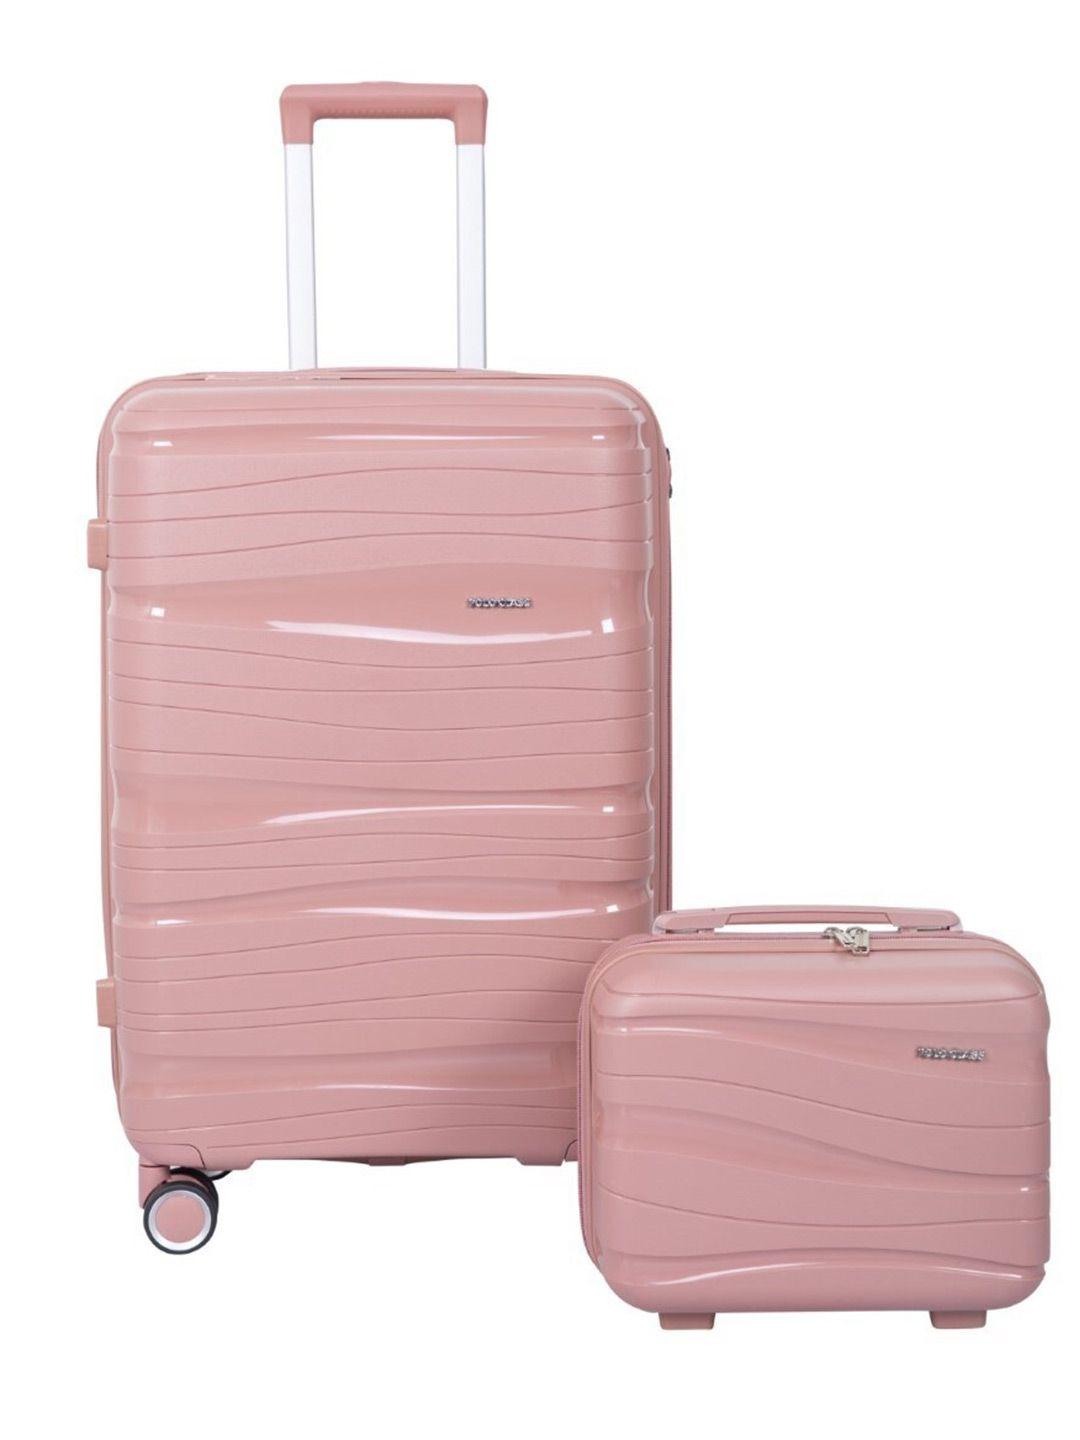 polo class set of 2 hard-sided trolley suitcase